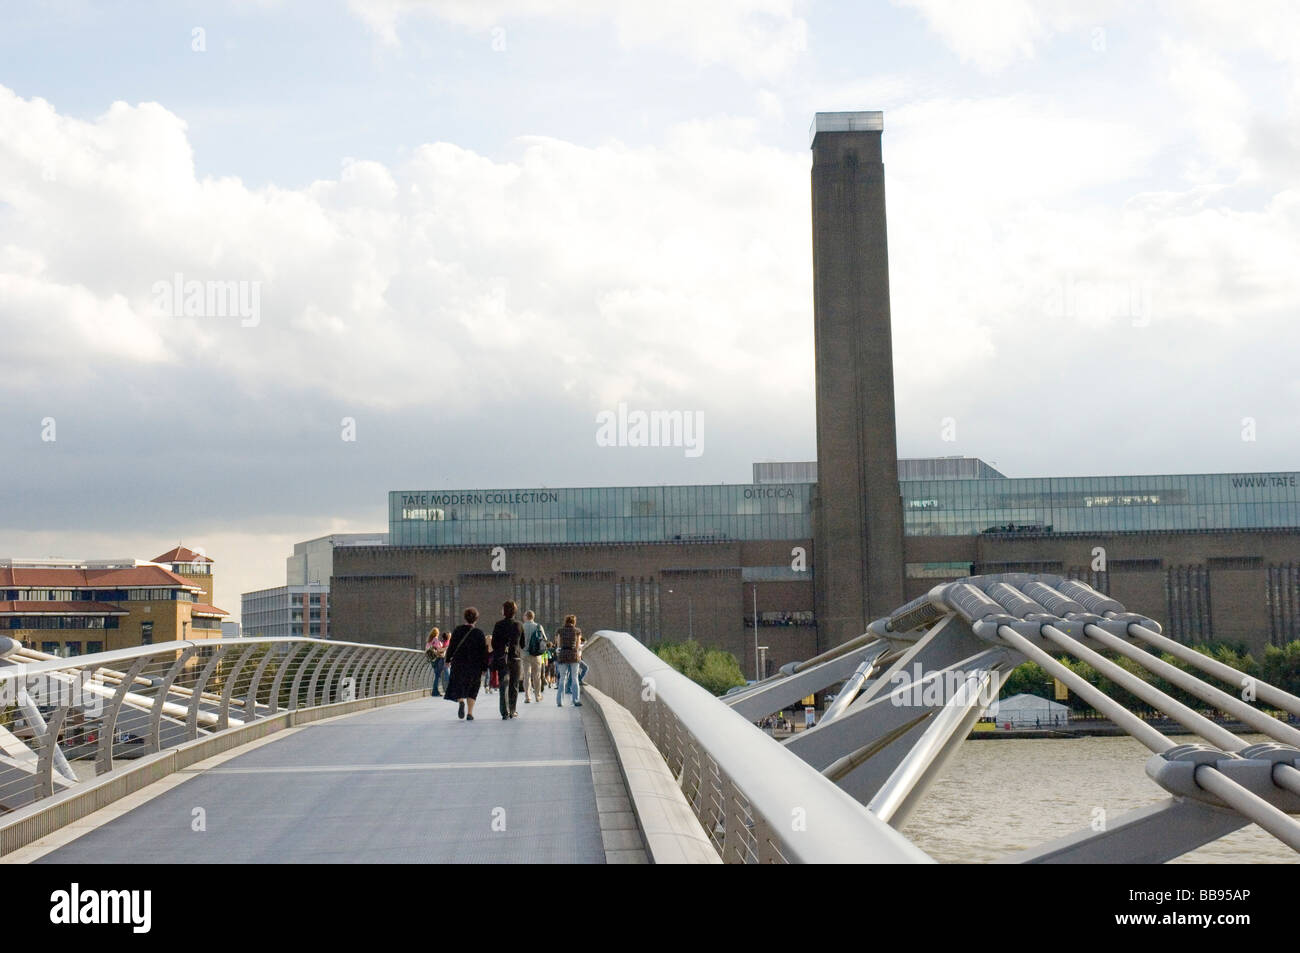 millenium footbridge over the river thames in london with the tatemodern art gallery in the background Stock Photo